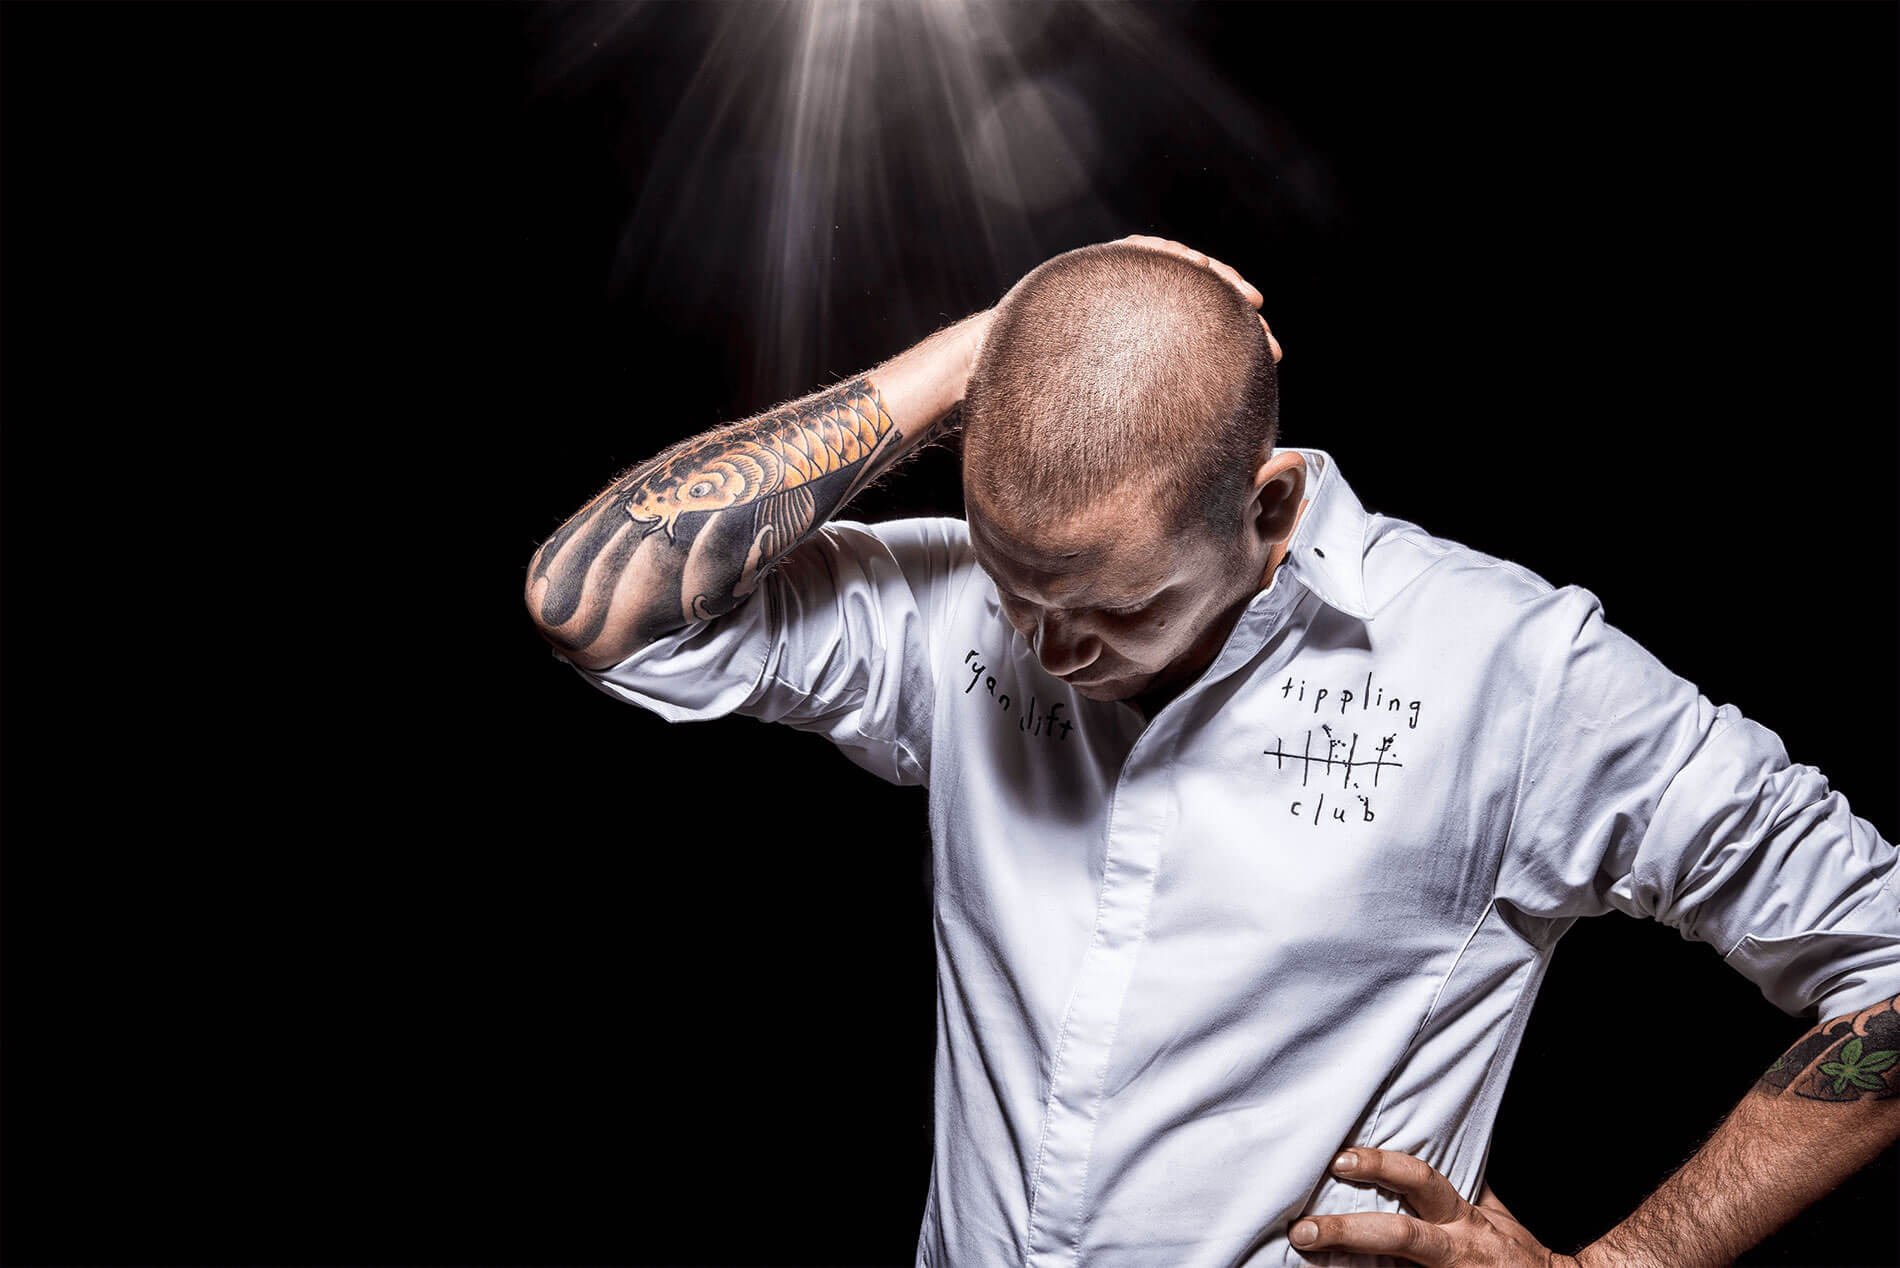 One of the most inspiring chefs nowadays - Ryan Clift